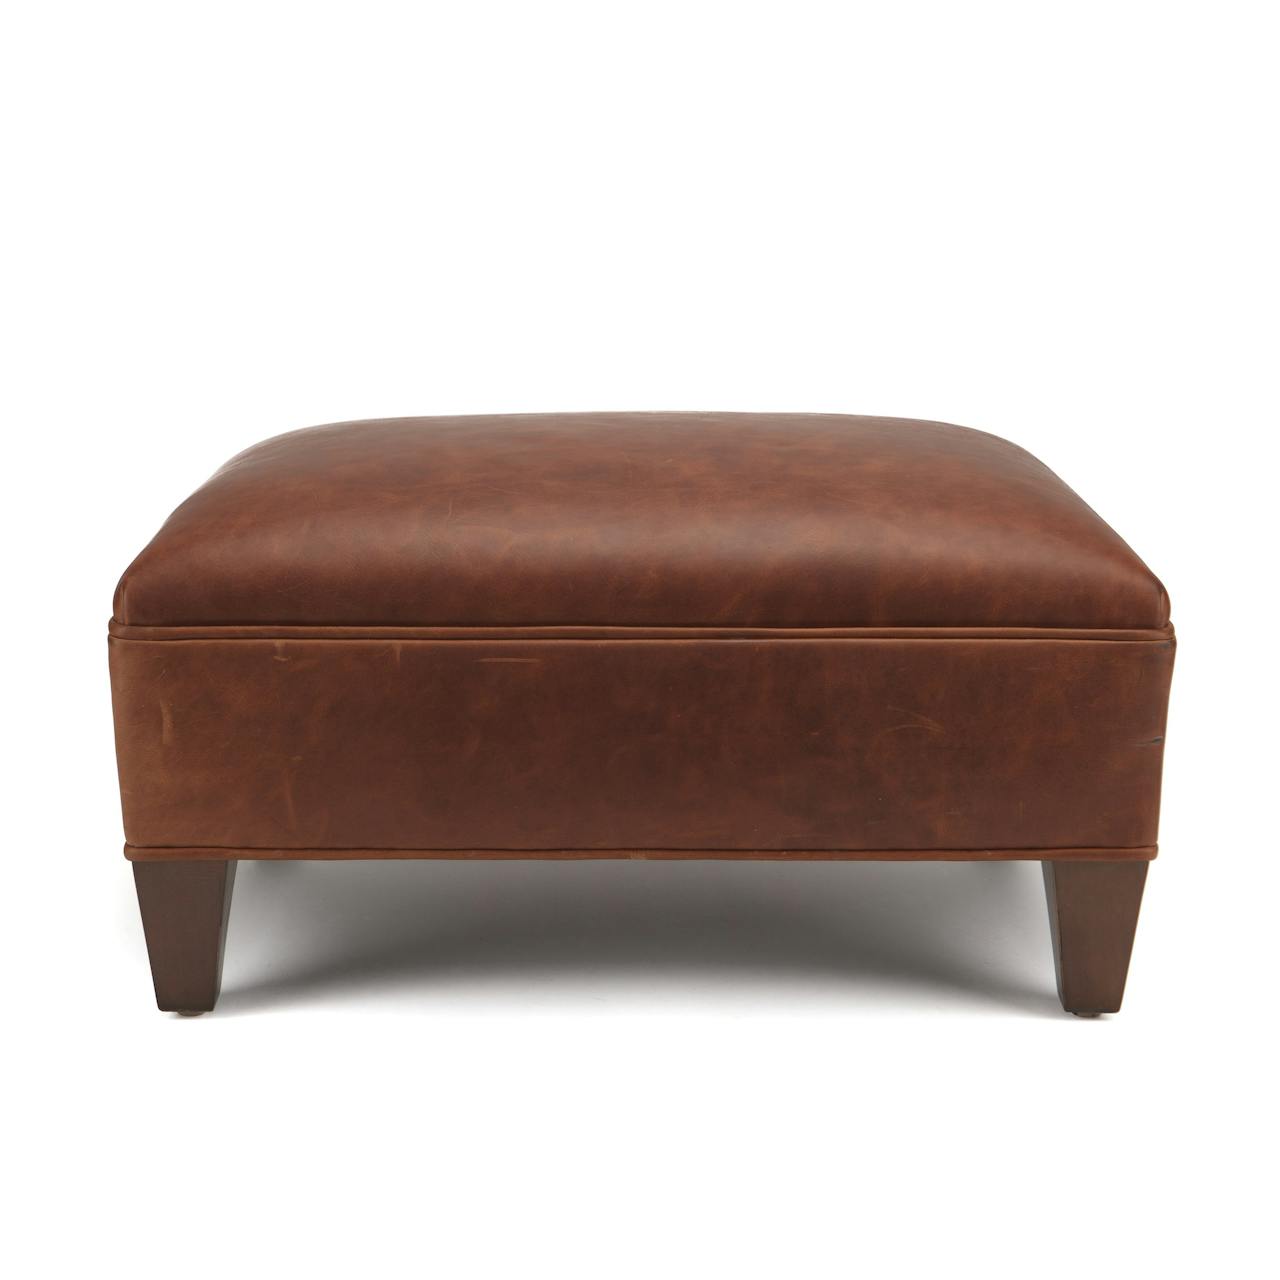 Moore & Giles Jefferson Street Ottoman (Made to Order)